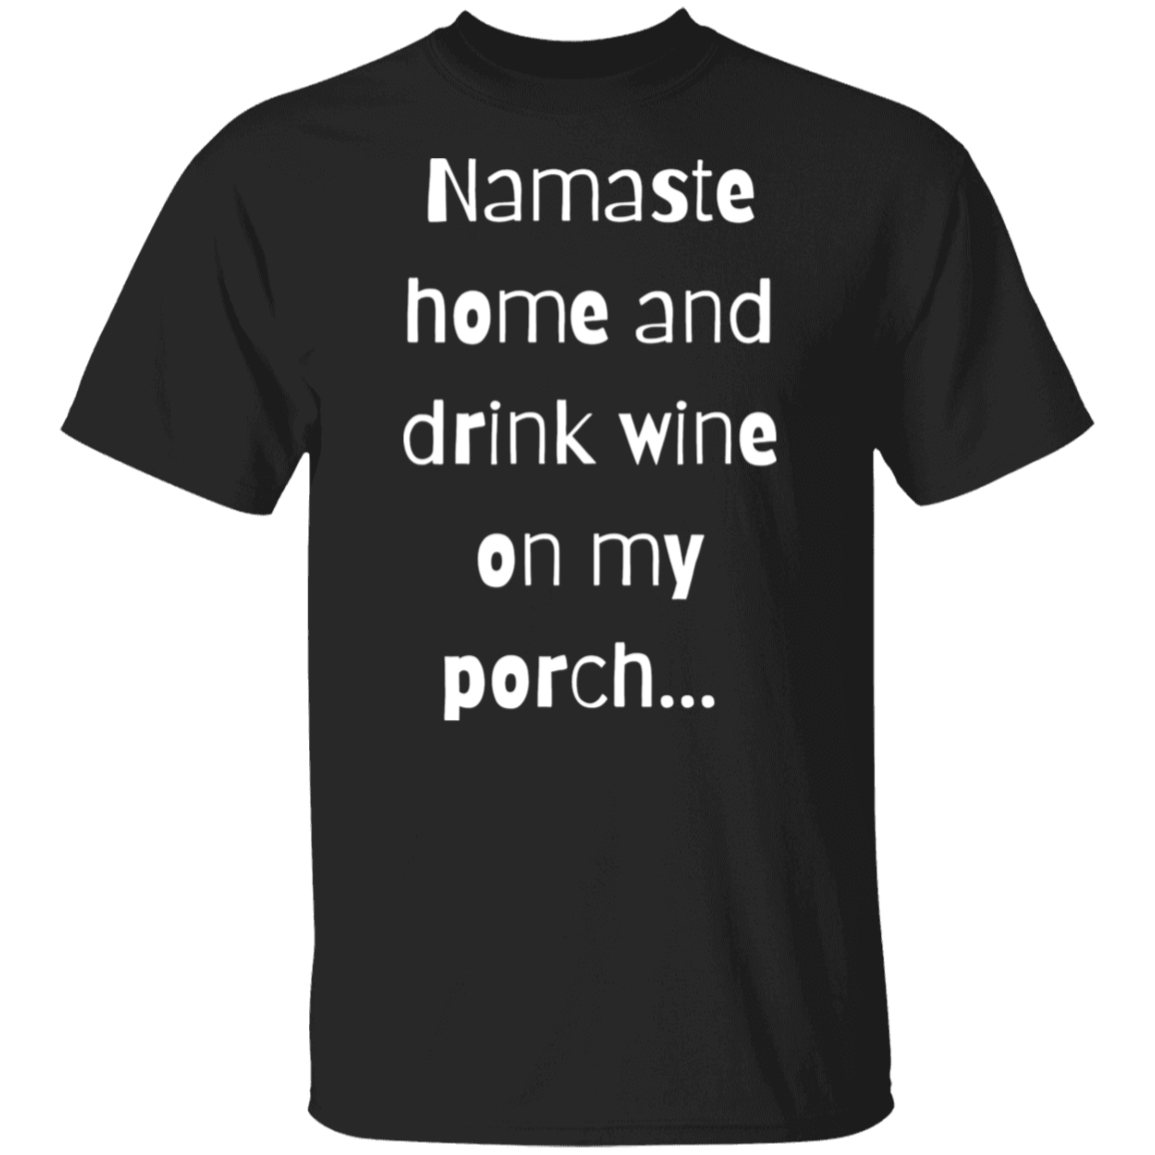 Namaste Home and drink on my porch T-Shirt